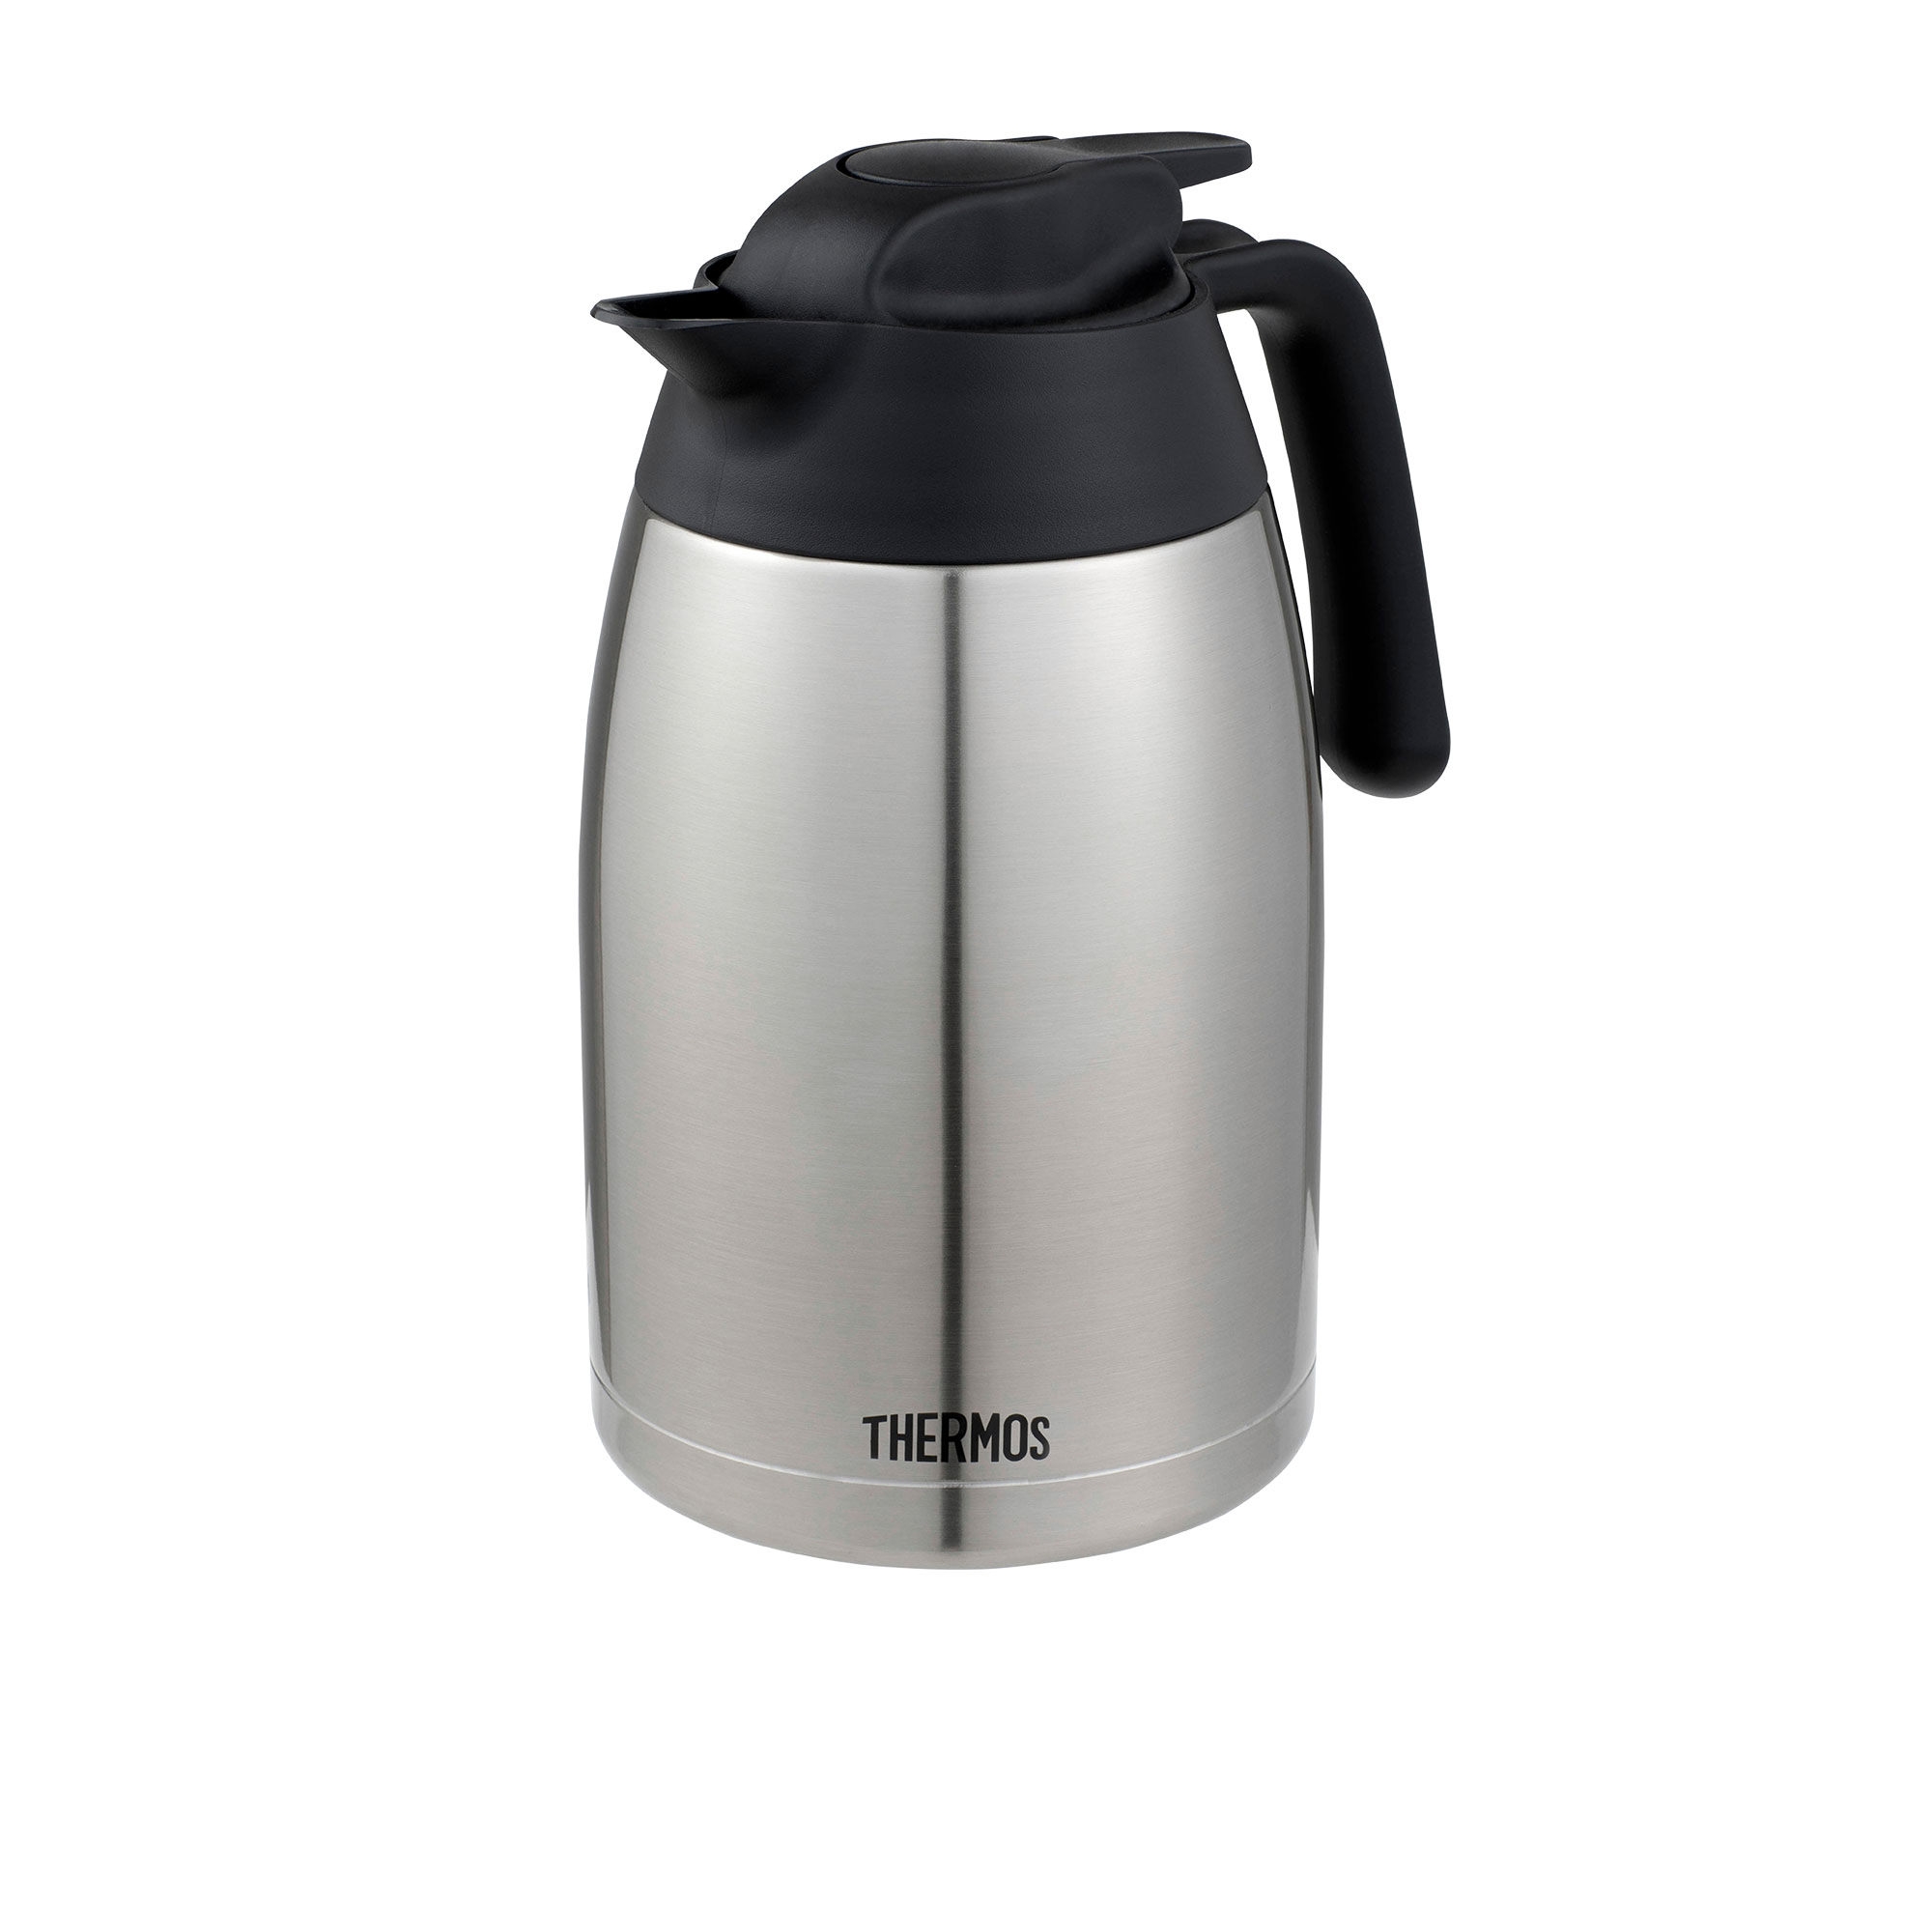 Thermos Insulated Carafe 1.5L Silver Image 1